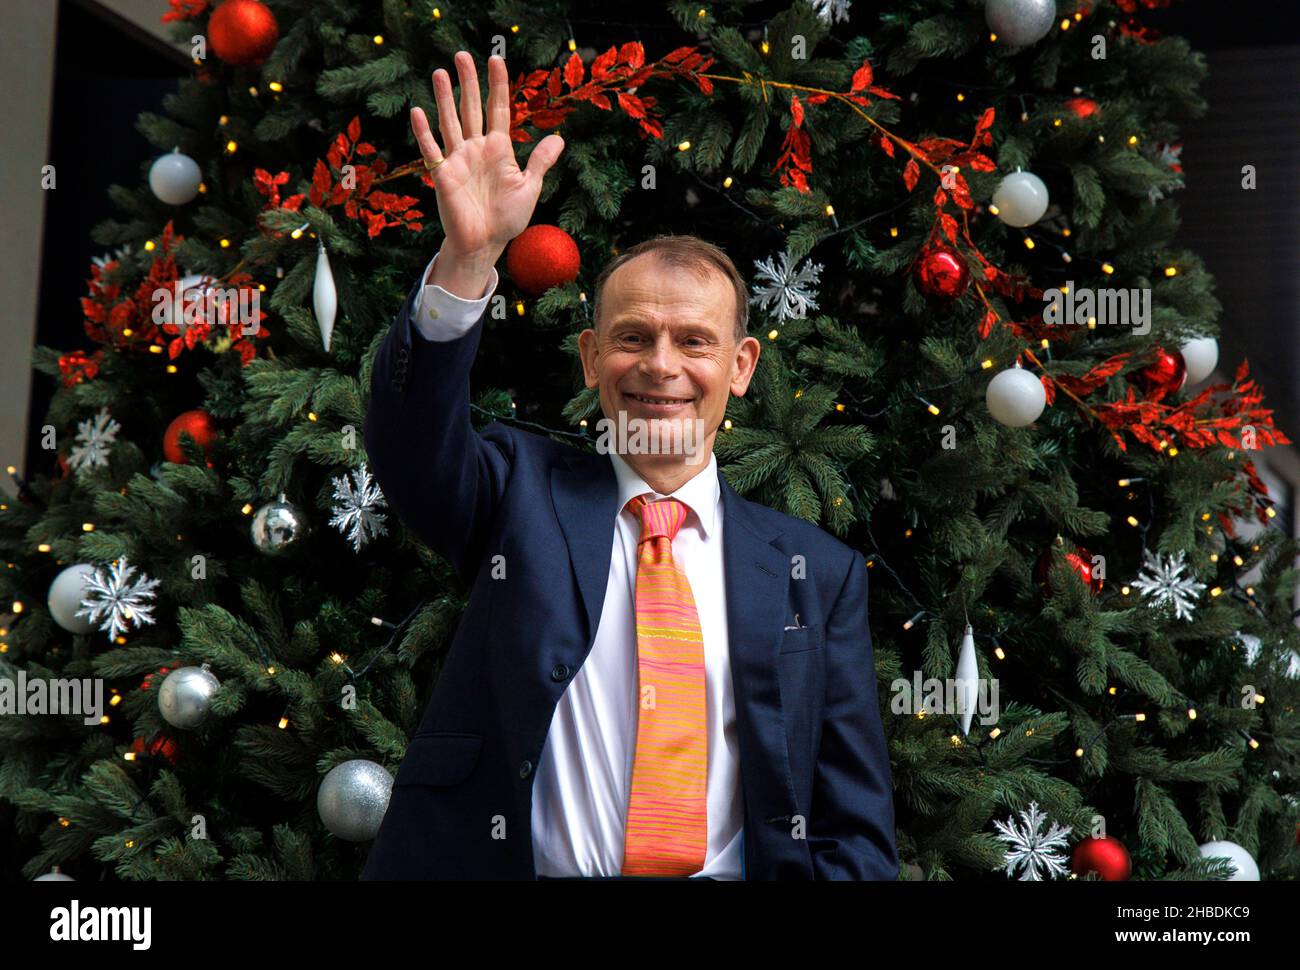 London, UK. 19th Dec, 2021. Andrew Marr waves goodbye as he leaves the BBC Studios after presenting his final show. He is joining Global radio and writing and presenting for other companies in the New Year. He is leaving the BBC after 21 years including 16 years presenting his Sunday morning show. Credit: Tommy London/Alamy Live News Stock Photo